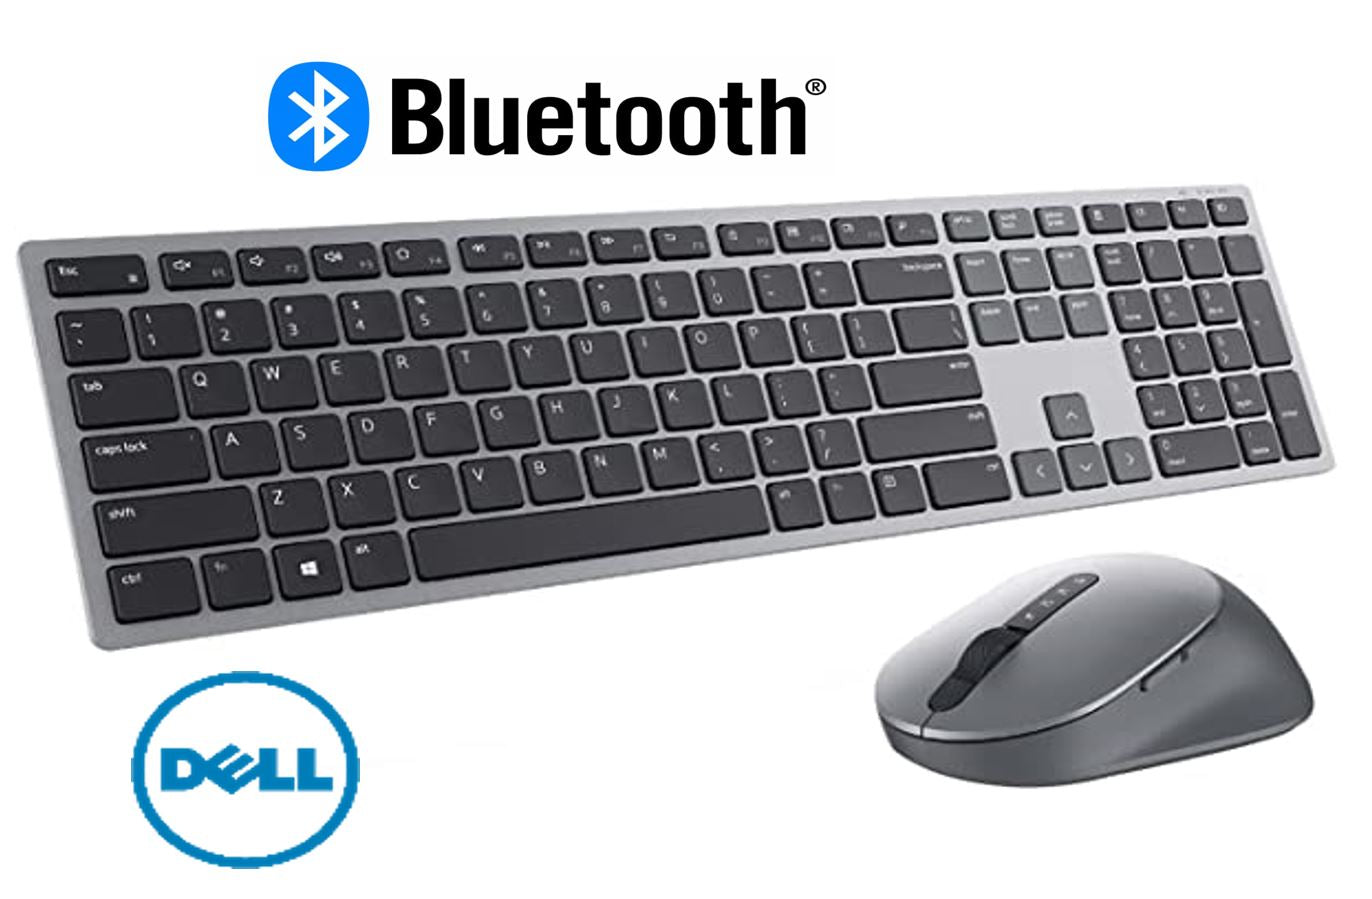 DELL KM7120 BLUETOOTH 5.0 MULTI-DEVICE  KEYBOARD AND MOUSE COMBO WIRELESS 2.4 GHZ